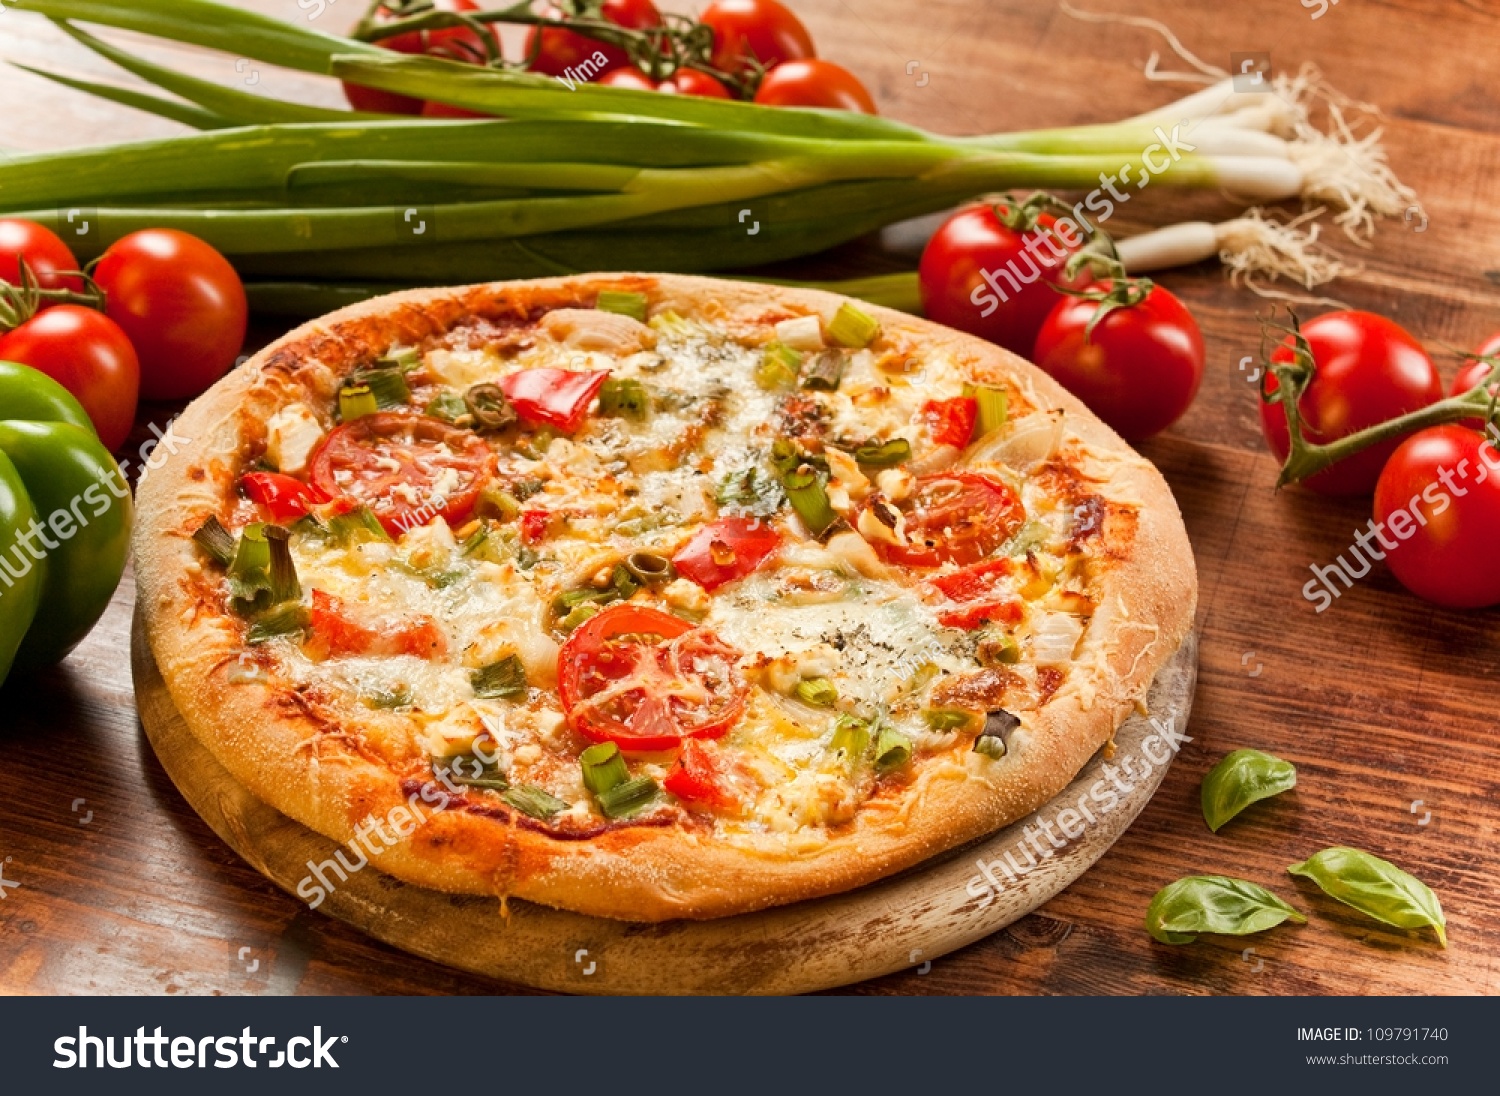 Freshly Prepared Pizza, Baked With Herbs And Vegetables Stock Photo ...